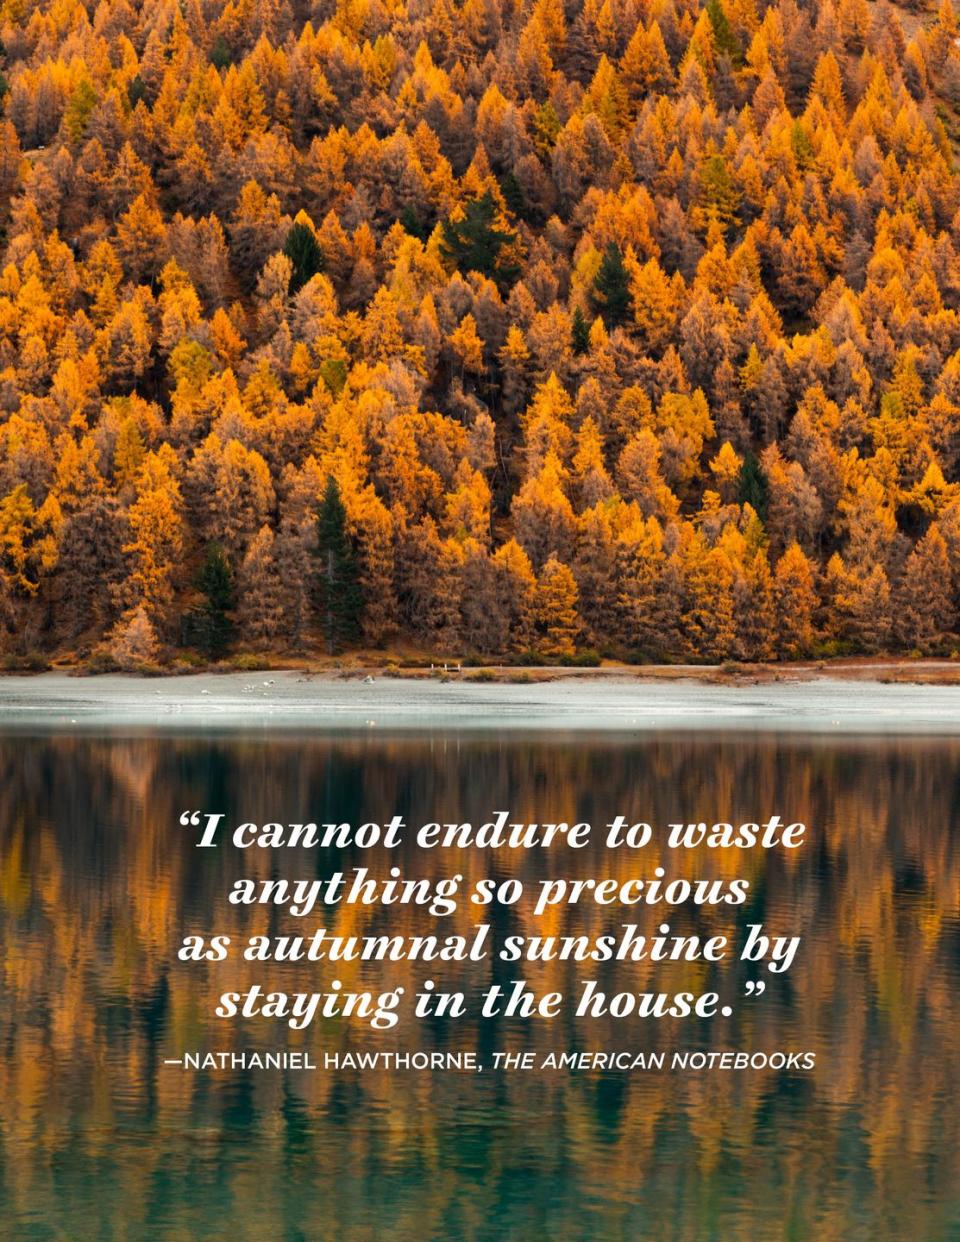 <p>“I cannot endure to waste anything so precious as autumnal sunshine by staying in the house."</p>